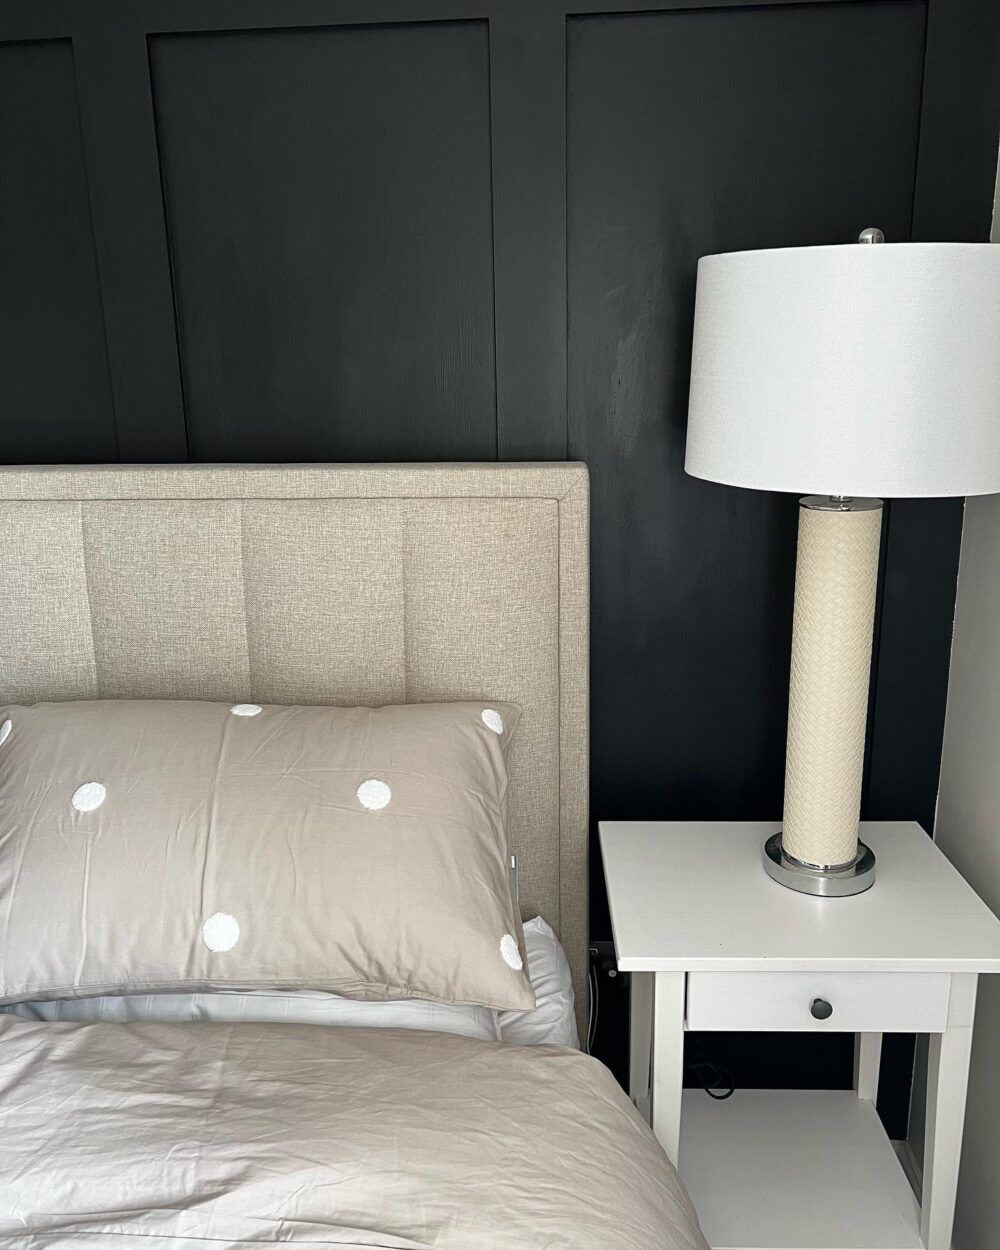 The corner of a beige headboard behind beige bedding. The bed is next to a small white bedside table with a white lamp, and against a black wall.